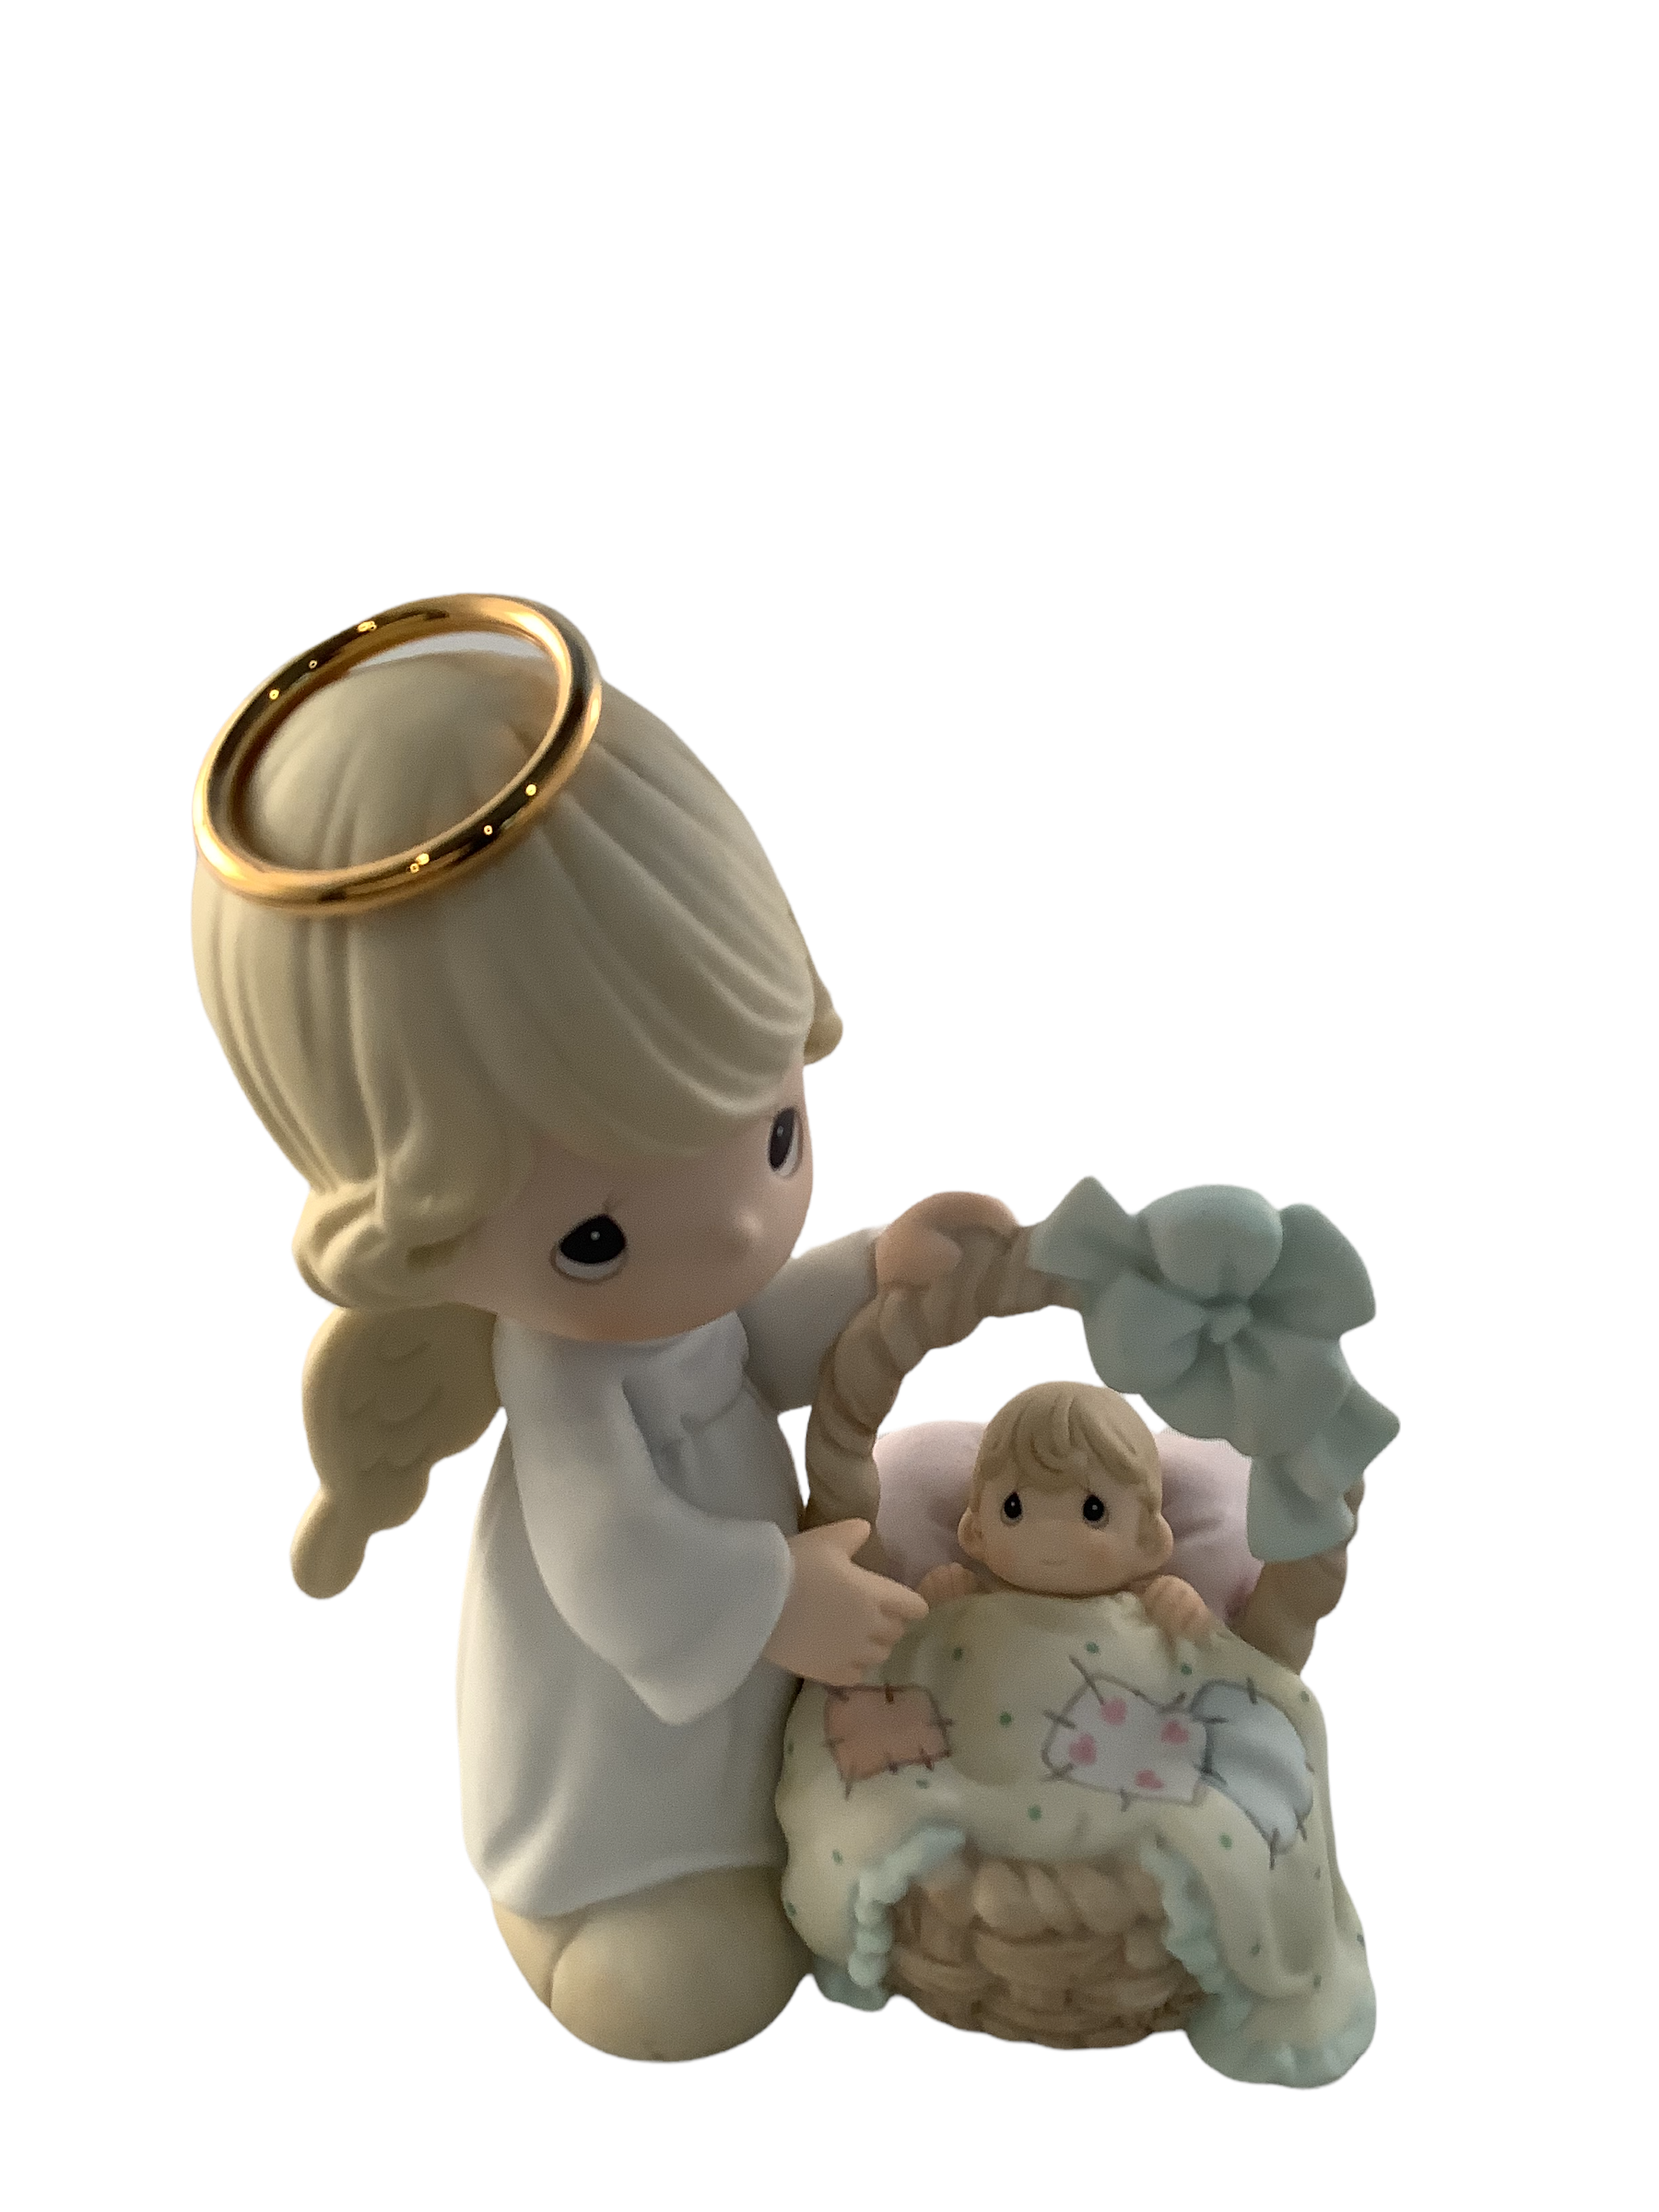 A Child Is A Gift Of God - Precious Moment Figurine